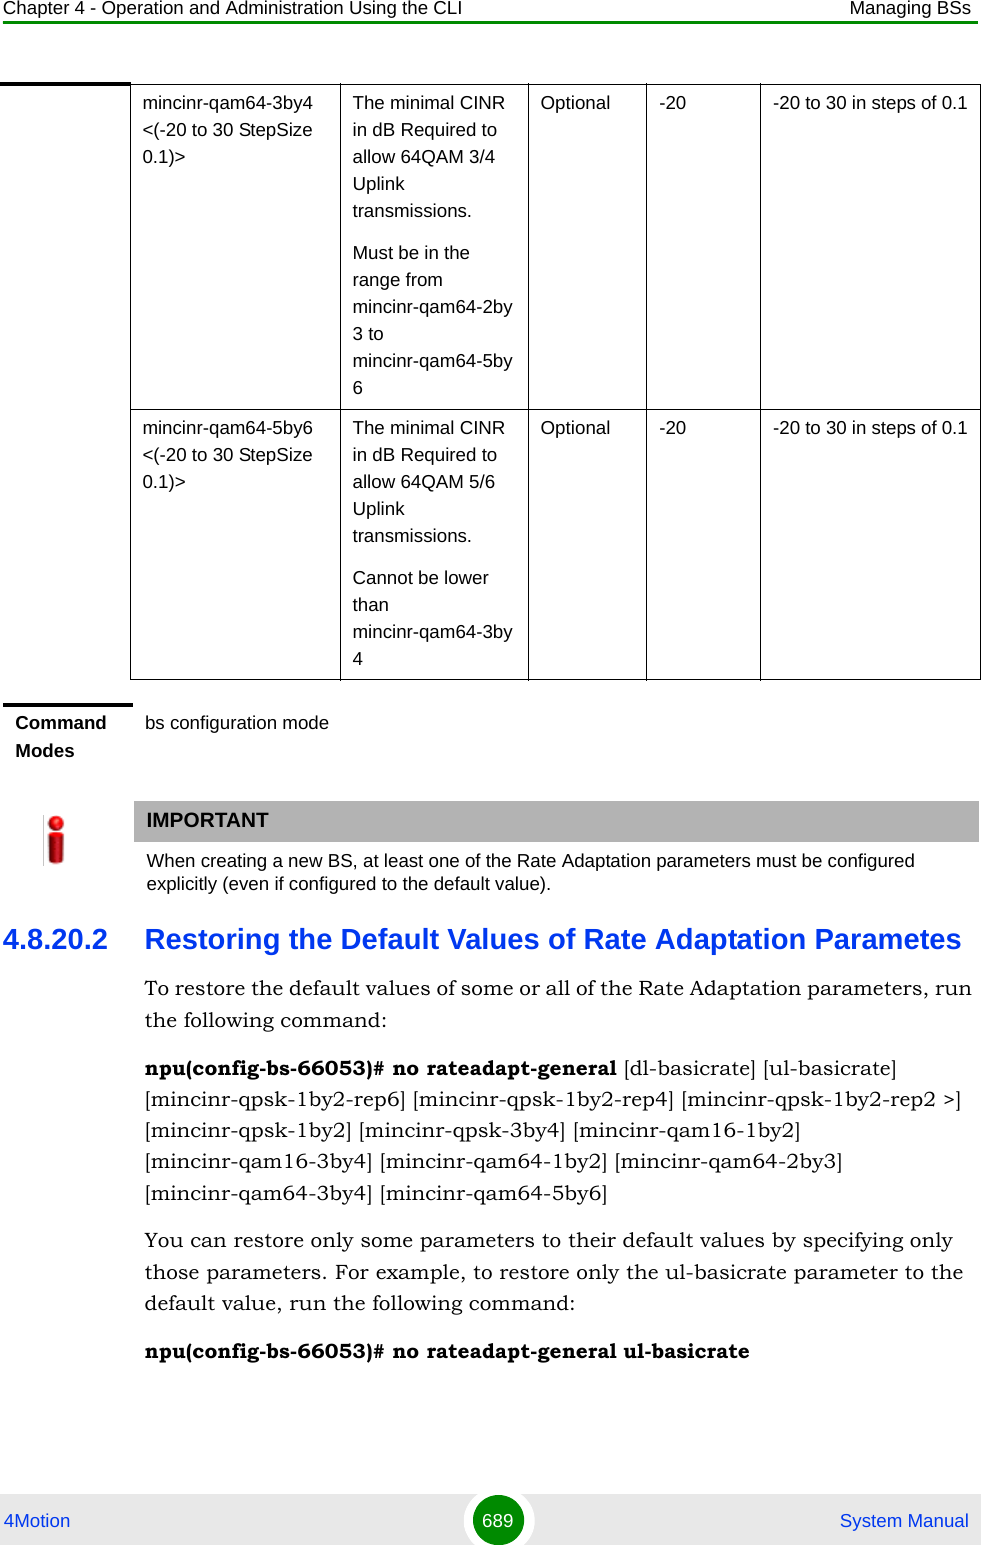 Chapter 4 - Operation and Administration Using the CLI Managing BSs4Motion 689  System Manual4.8.20.2 Restoring the Default Values of Rate Adaptation ParametesTo restore the default values of some or all of the Rate Adaptation parameters, run the following command:npu(config-bs-66053)# no rateadapt-general [dl-basicrate] [ul-basicrate] [mincinr-qpsk-1by2-rep6] [mincinr-qpsk-1by2-rep4] [mincinr-qpsk-1by2-rep2 &gt;] [mincinr-qpsk-1by2] [mincinr-qpsk-3by4] [mincinr-qam16-1by2] [mincinr-qam16-3by4] [mincinr-qam64-1by2] [mincinr-qam64-2by3] [mincinr-qam64-3by4] [mincinr-qam64-5by6]You can restore only some parameters to their default values by specifying only those parameters. For example, to restore only the ul-basicrate parameter to the default value, run the following command:npu(config-bs-66053)# no rateadapt-general ul-basicratemincinr-qam64-3by4 &lt;(-20 to 30 StepSize 0.1)&gt;The minimal CINR in dB Required to allow 64QAM 3/4 Uplink transmissions.Must be in the range from mincinr-qam64-2by3 to mincinr-qam64-5by6Optional -20 -20 to 30 in steps of 0.1mincinr-qam64-5by6 &lt;(-20 to 30 StepSize 0.1)&gt;The minimal CINR in dB Required to allow 64QAM 5/6 Uplink transmissions.Cannot be lower than mincinr-qam64-3by4Optional -20 -20 to 30 in steps of 0.1Command Modesbs configuration modeIMPORTANTWhen creating a new BS, at least one of the Rate Adaptation parameters must be configured explicitly (even if configured to the default value).